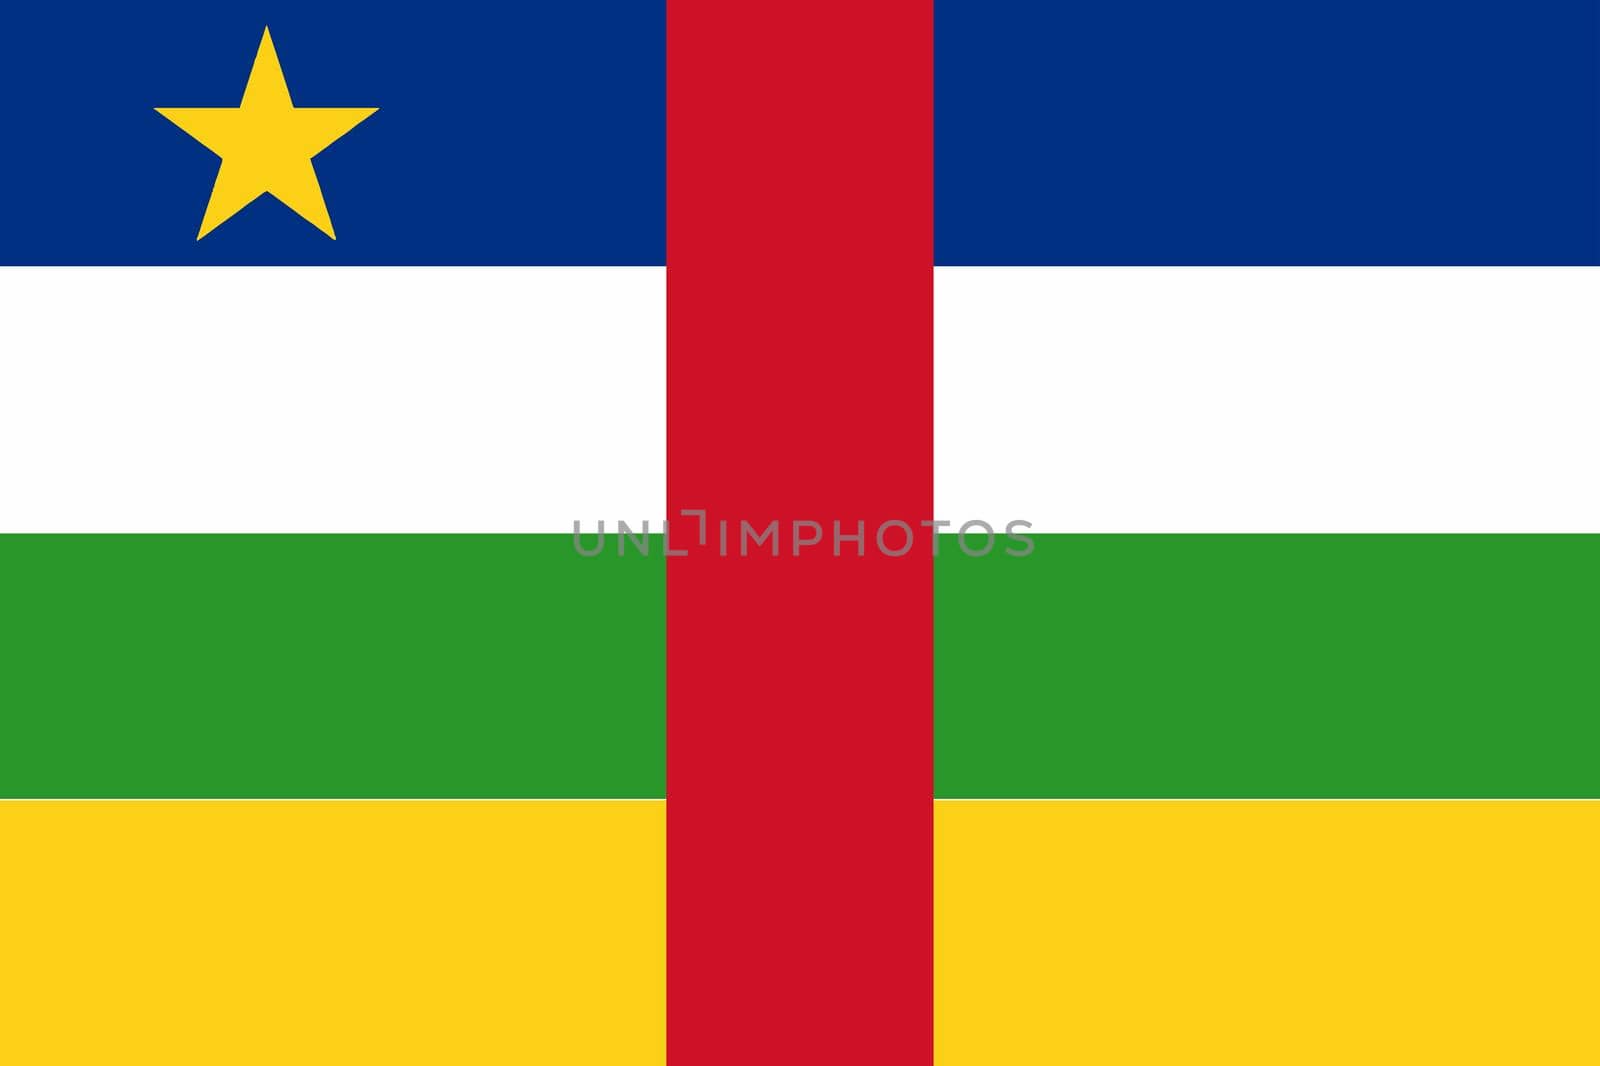 The flag of the African country of the Central African Republic